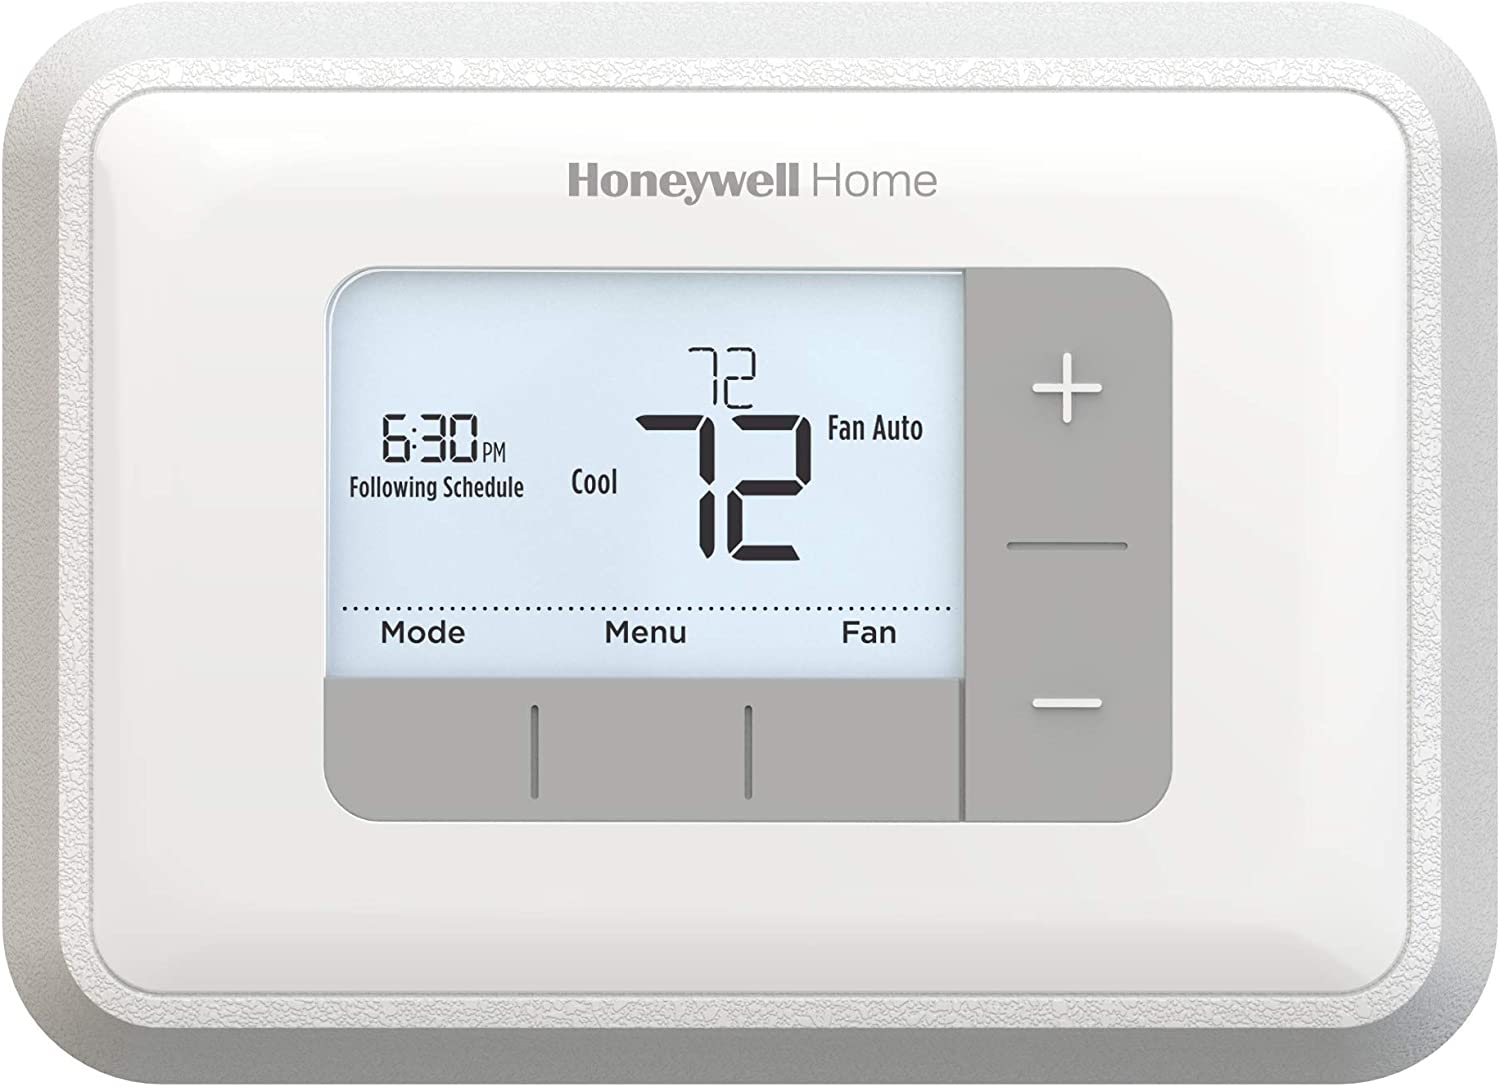 Honeywell Home Home RTH6360D1002 Programmable Thermostat, 5-2 Schedule, 1-Pack, White (Renewed)